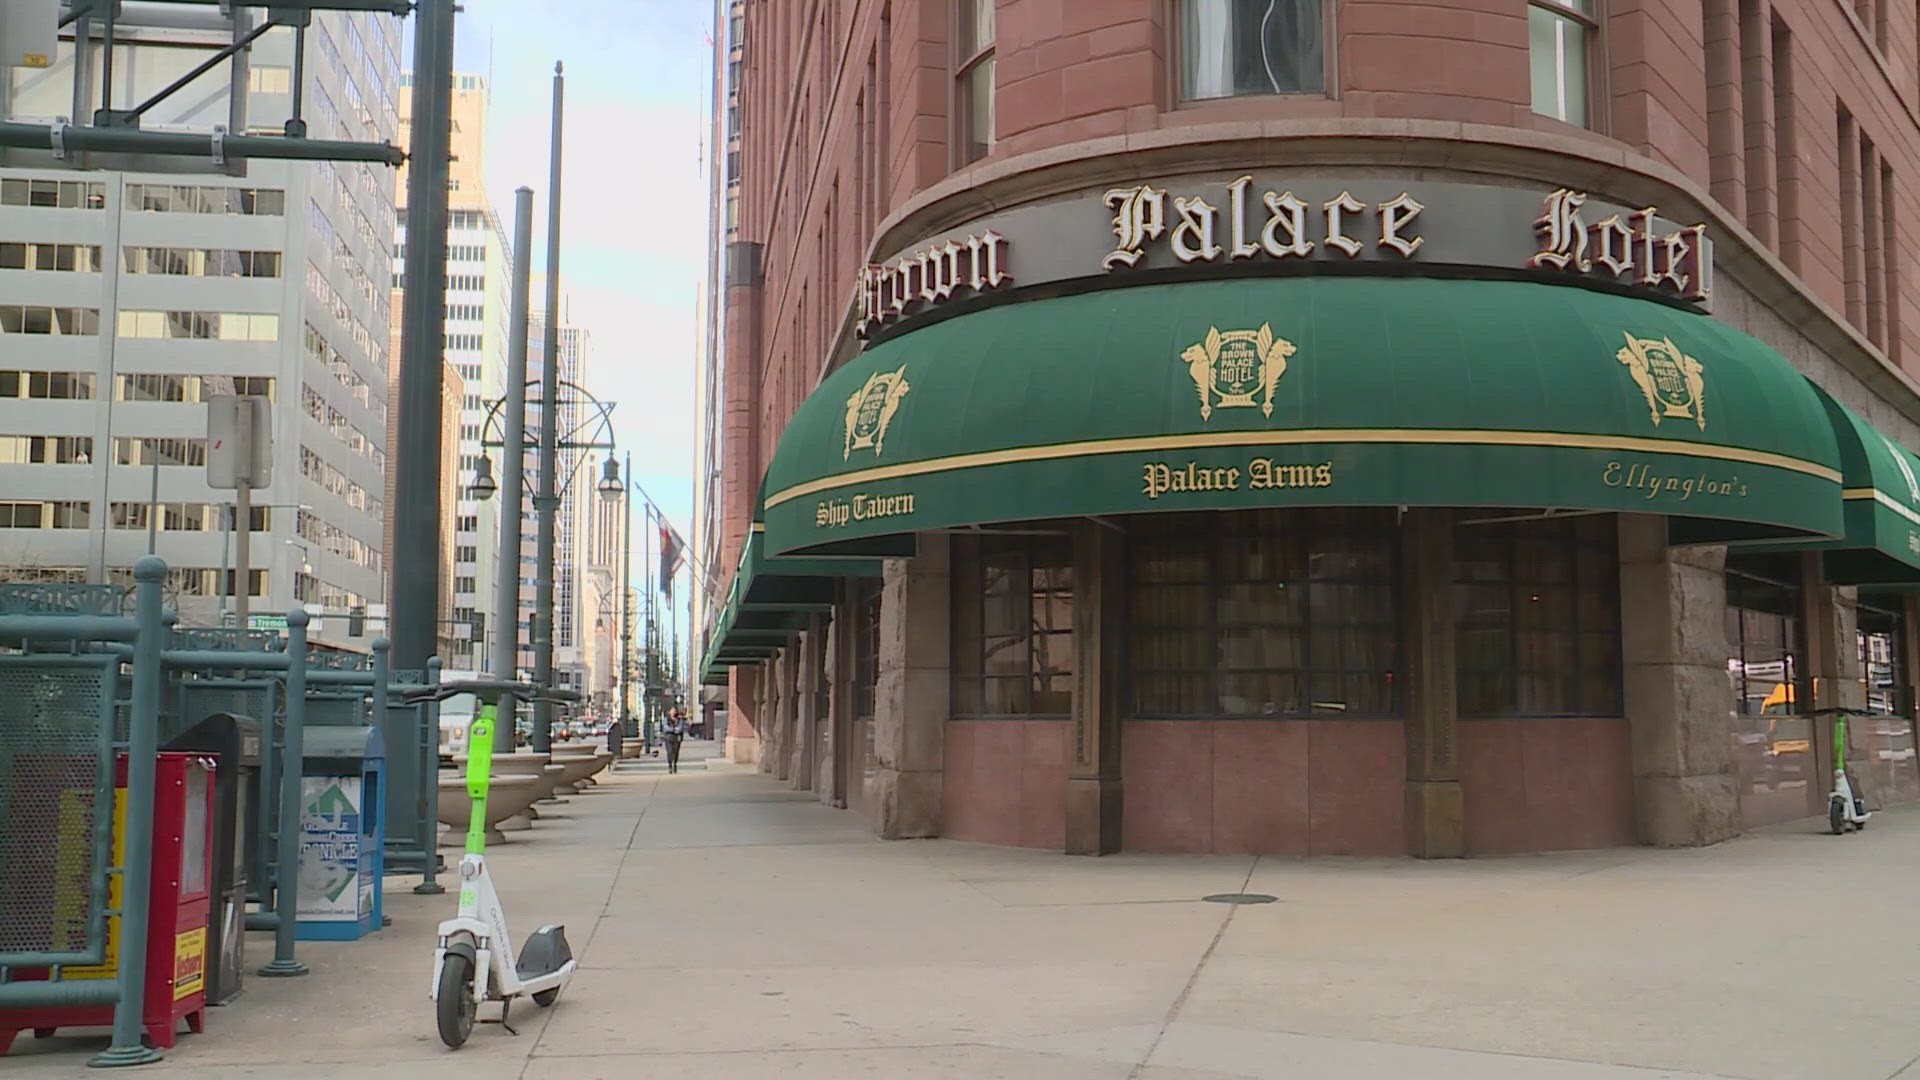 The Palace Arms, located inside The Brown Palace in downtown, said it will stop serving food this weekend while renovations are completed.